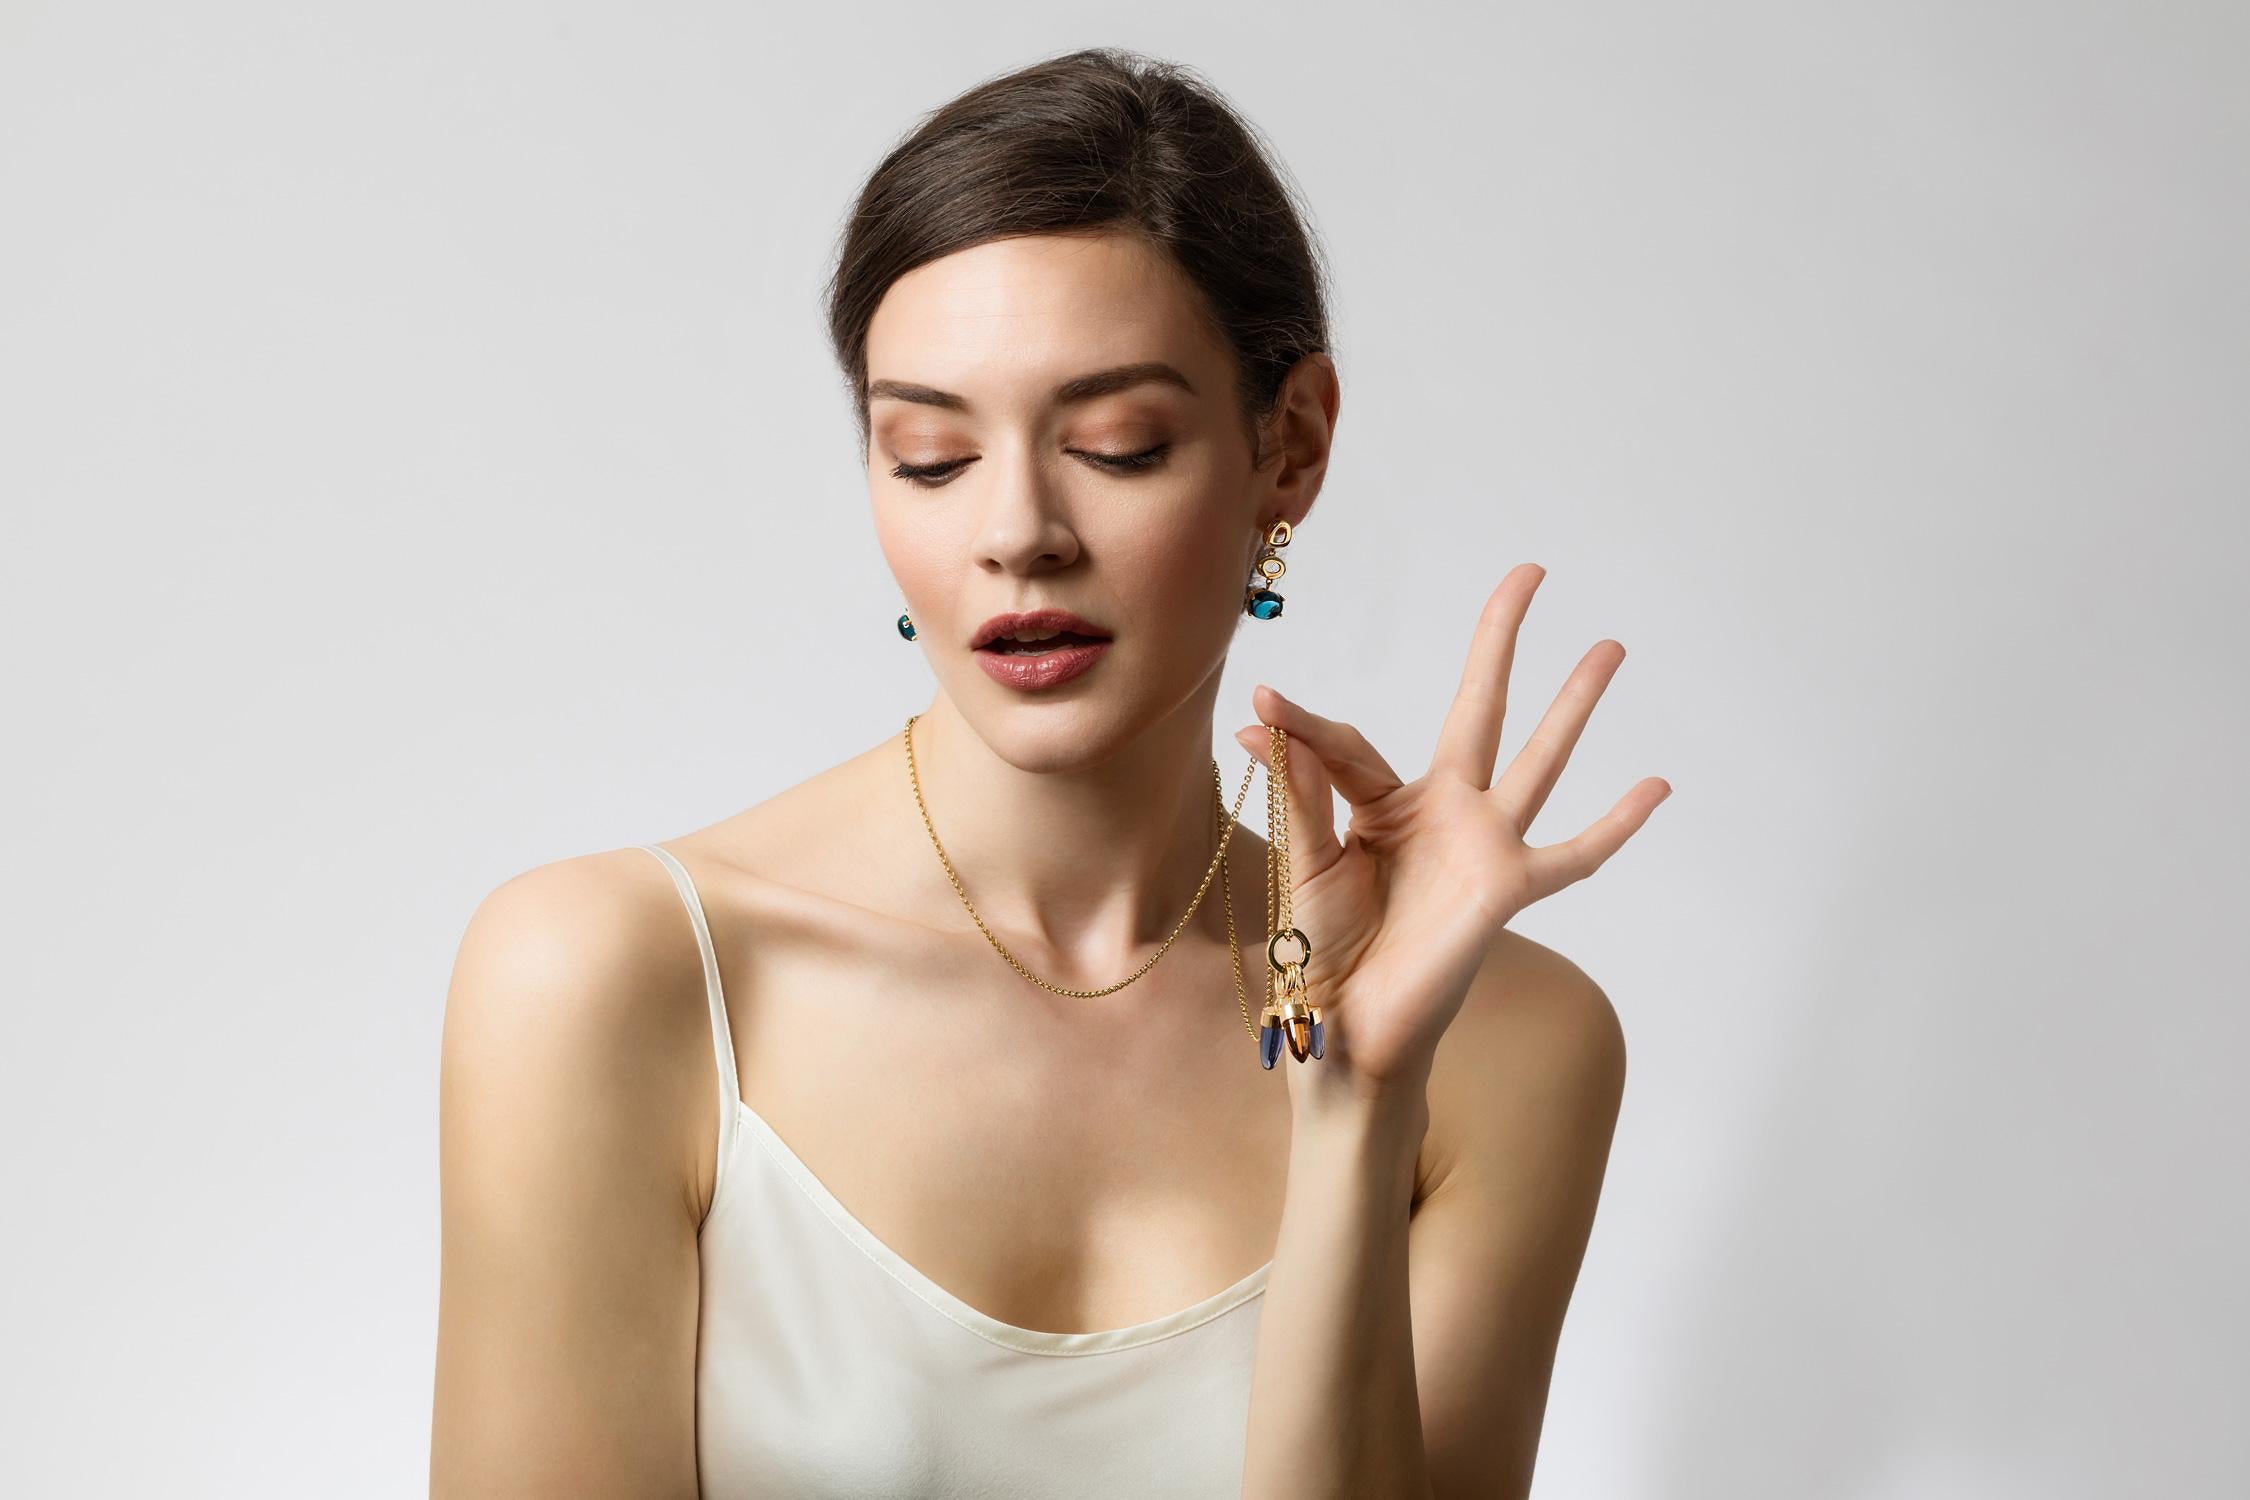 St Tropez
18kt solid gold drops, 10x12mm cabochon stone
The name says it all, charisma all the way. These earrings make you feel St Tropez chic. We recommend wearing them as evening wear, to a spectacular event, or just when you want to feel über